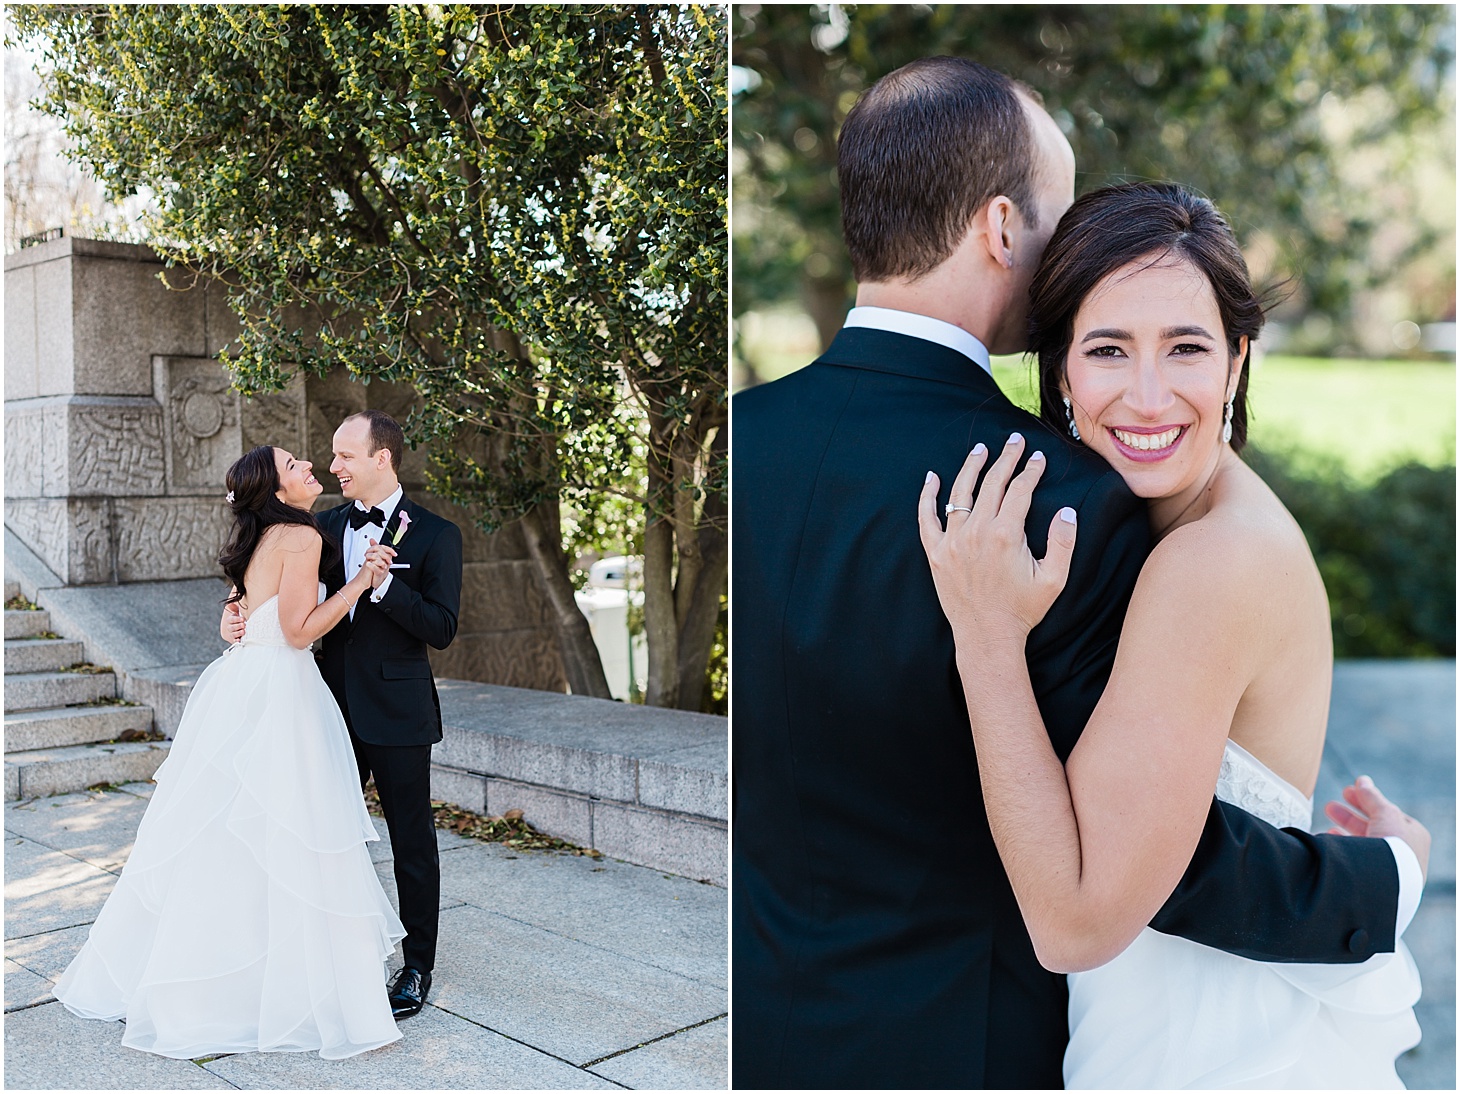 Spring Wedding Portraits on Capitol Hill, Museum-Inspired Spring Wedding at National Museum of Women in the Arts, Sarah Bradshaw Photography, DC Wedding Photographer